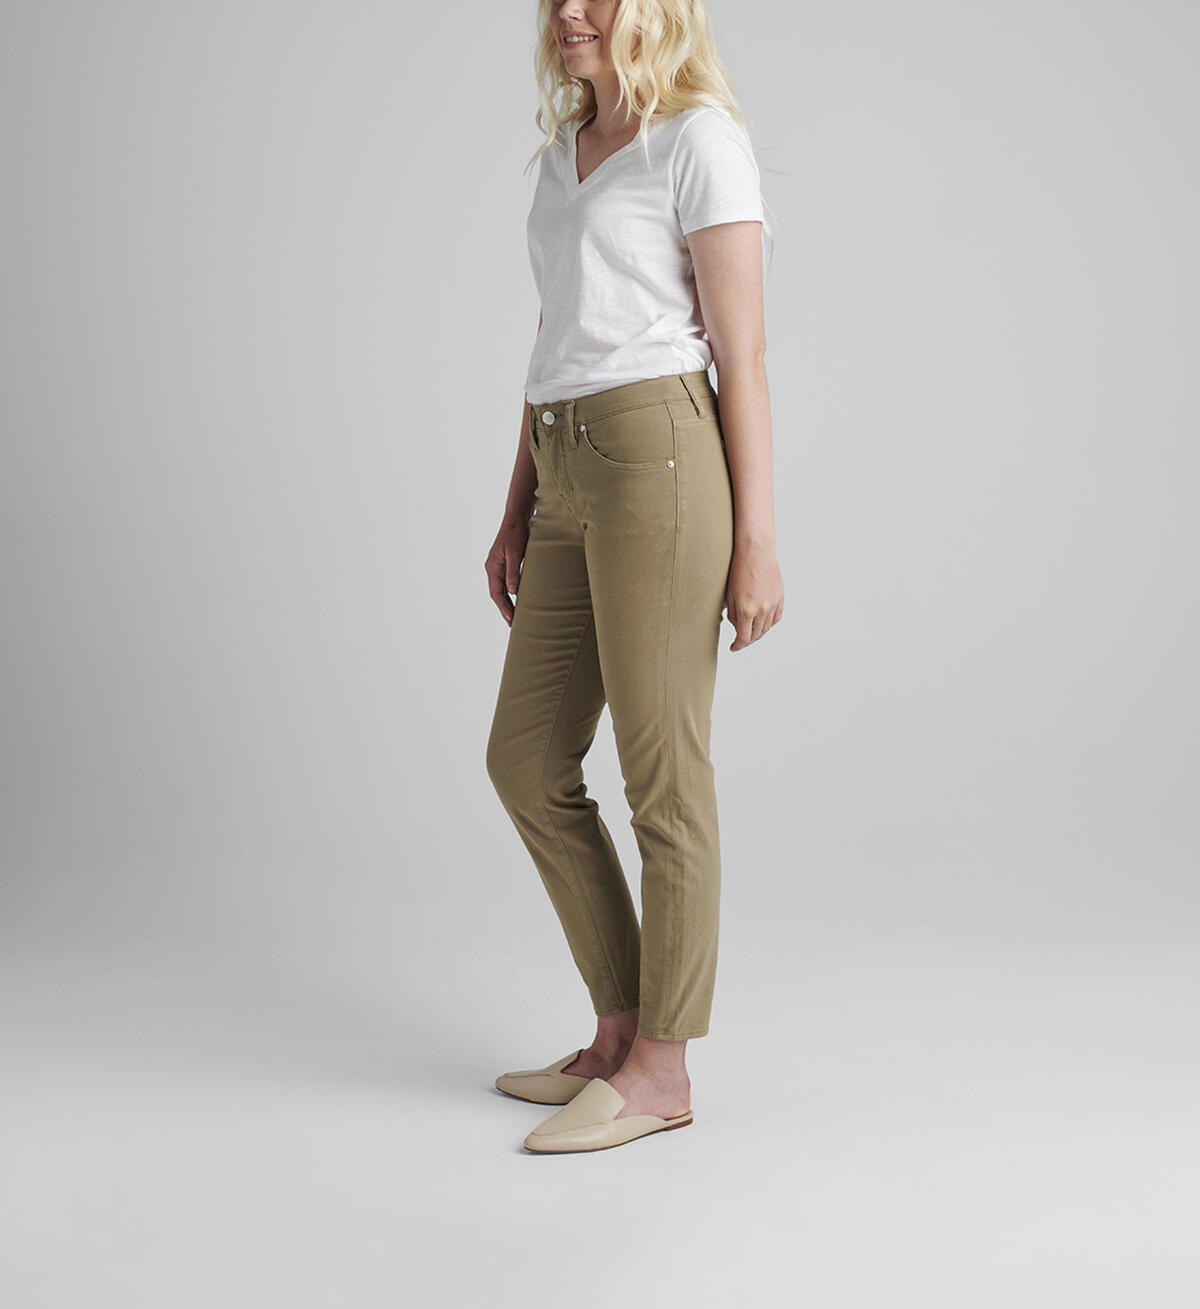 Cecilia Mid Rise Skinny Jeans, Chinchilla, hi-res image number 2